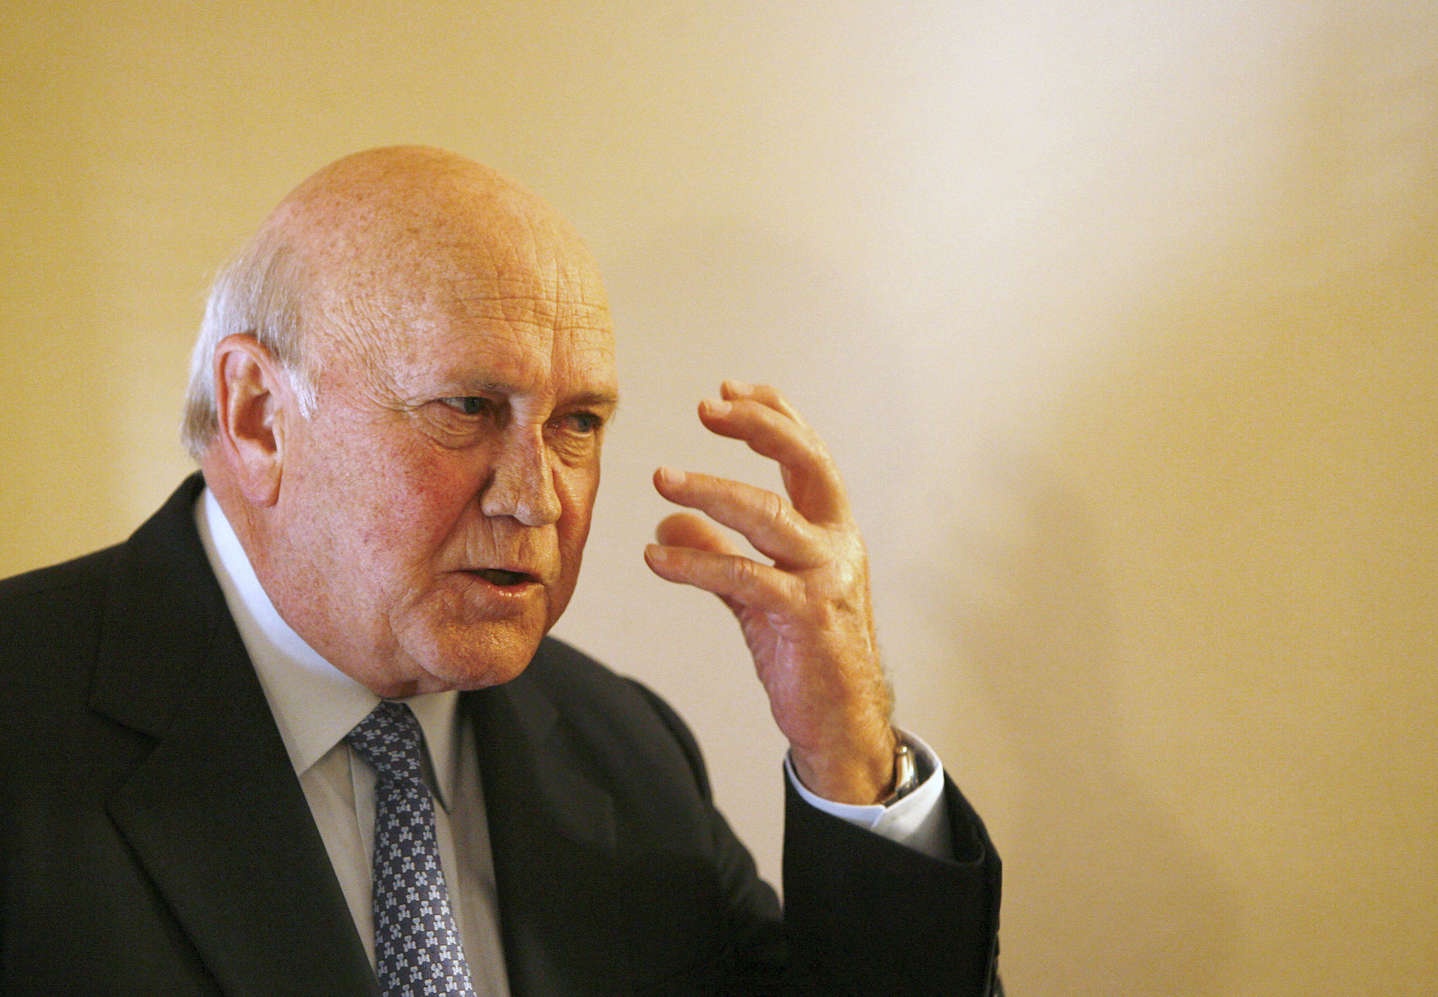 Former South African President FW de Klerk addresses a press conference in Cape Town